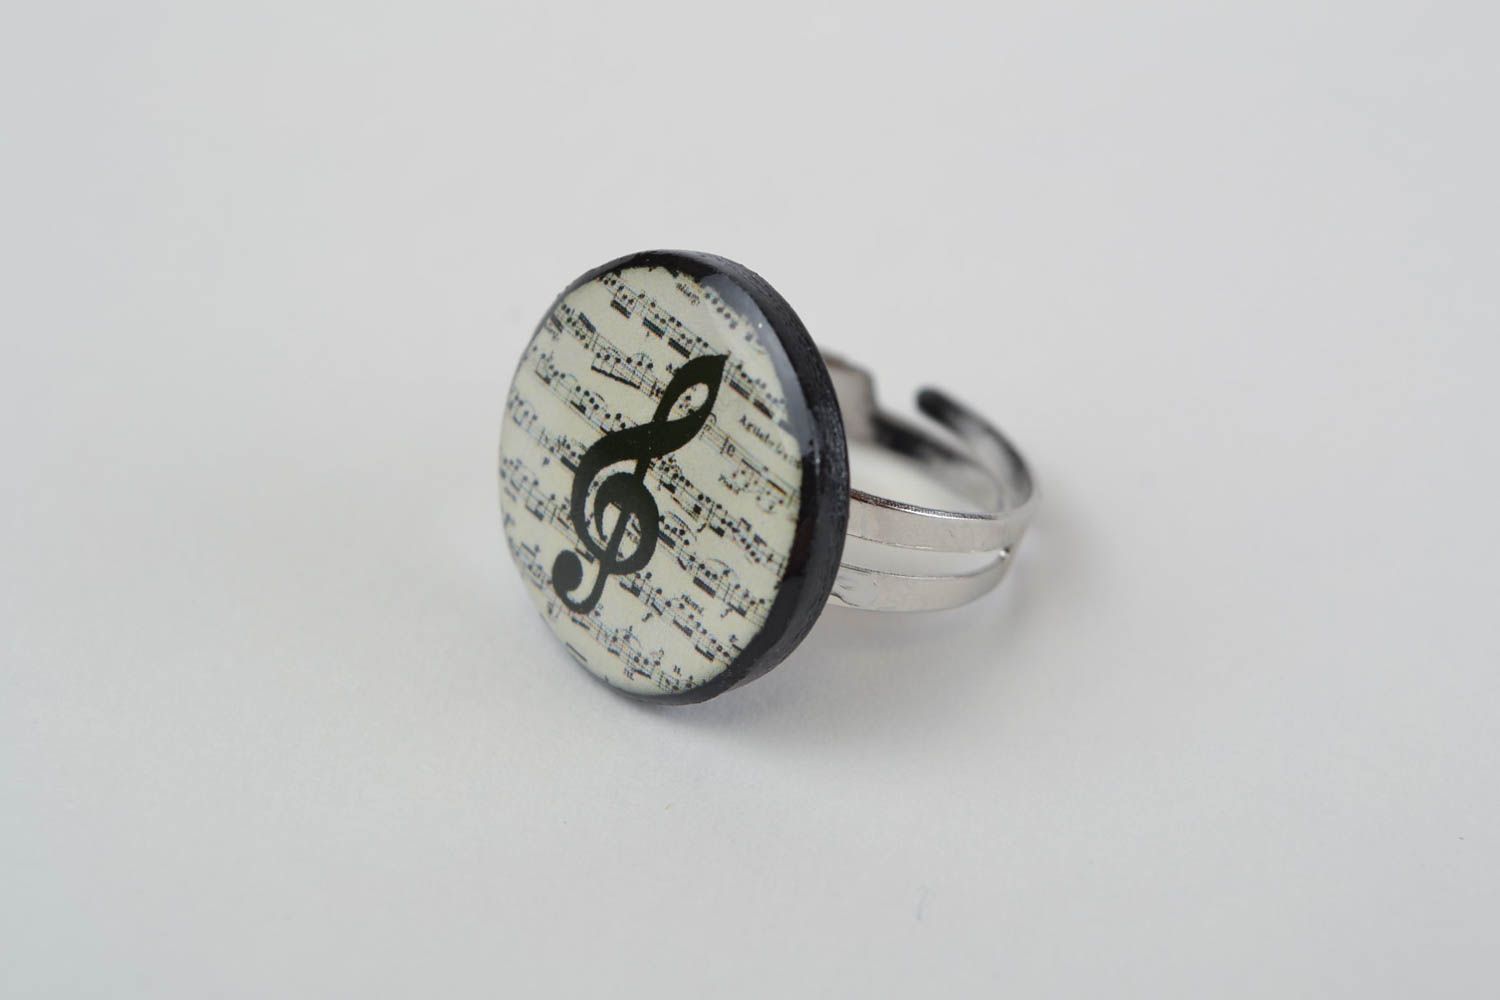 Handmade round polymer clay decoupage jewelry ring with tremble clef image photo 4